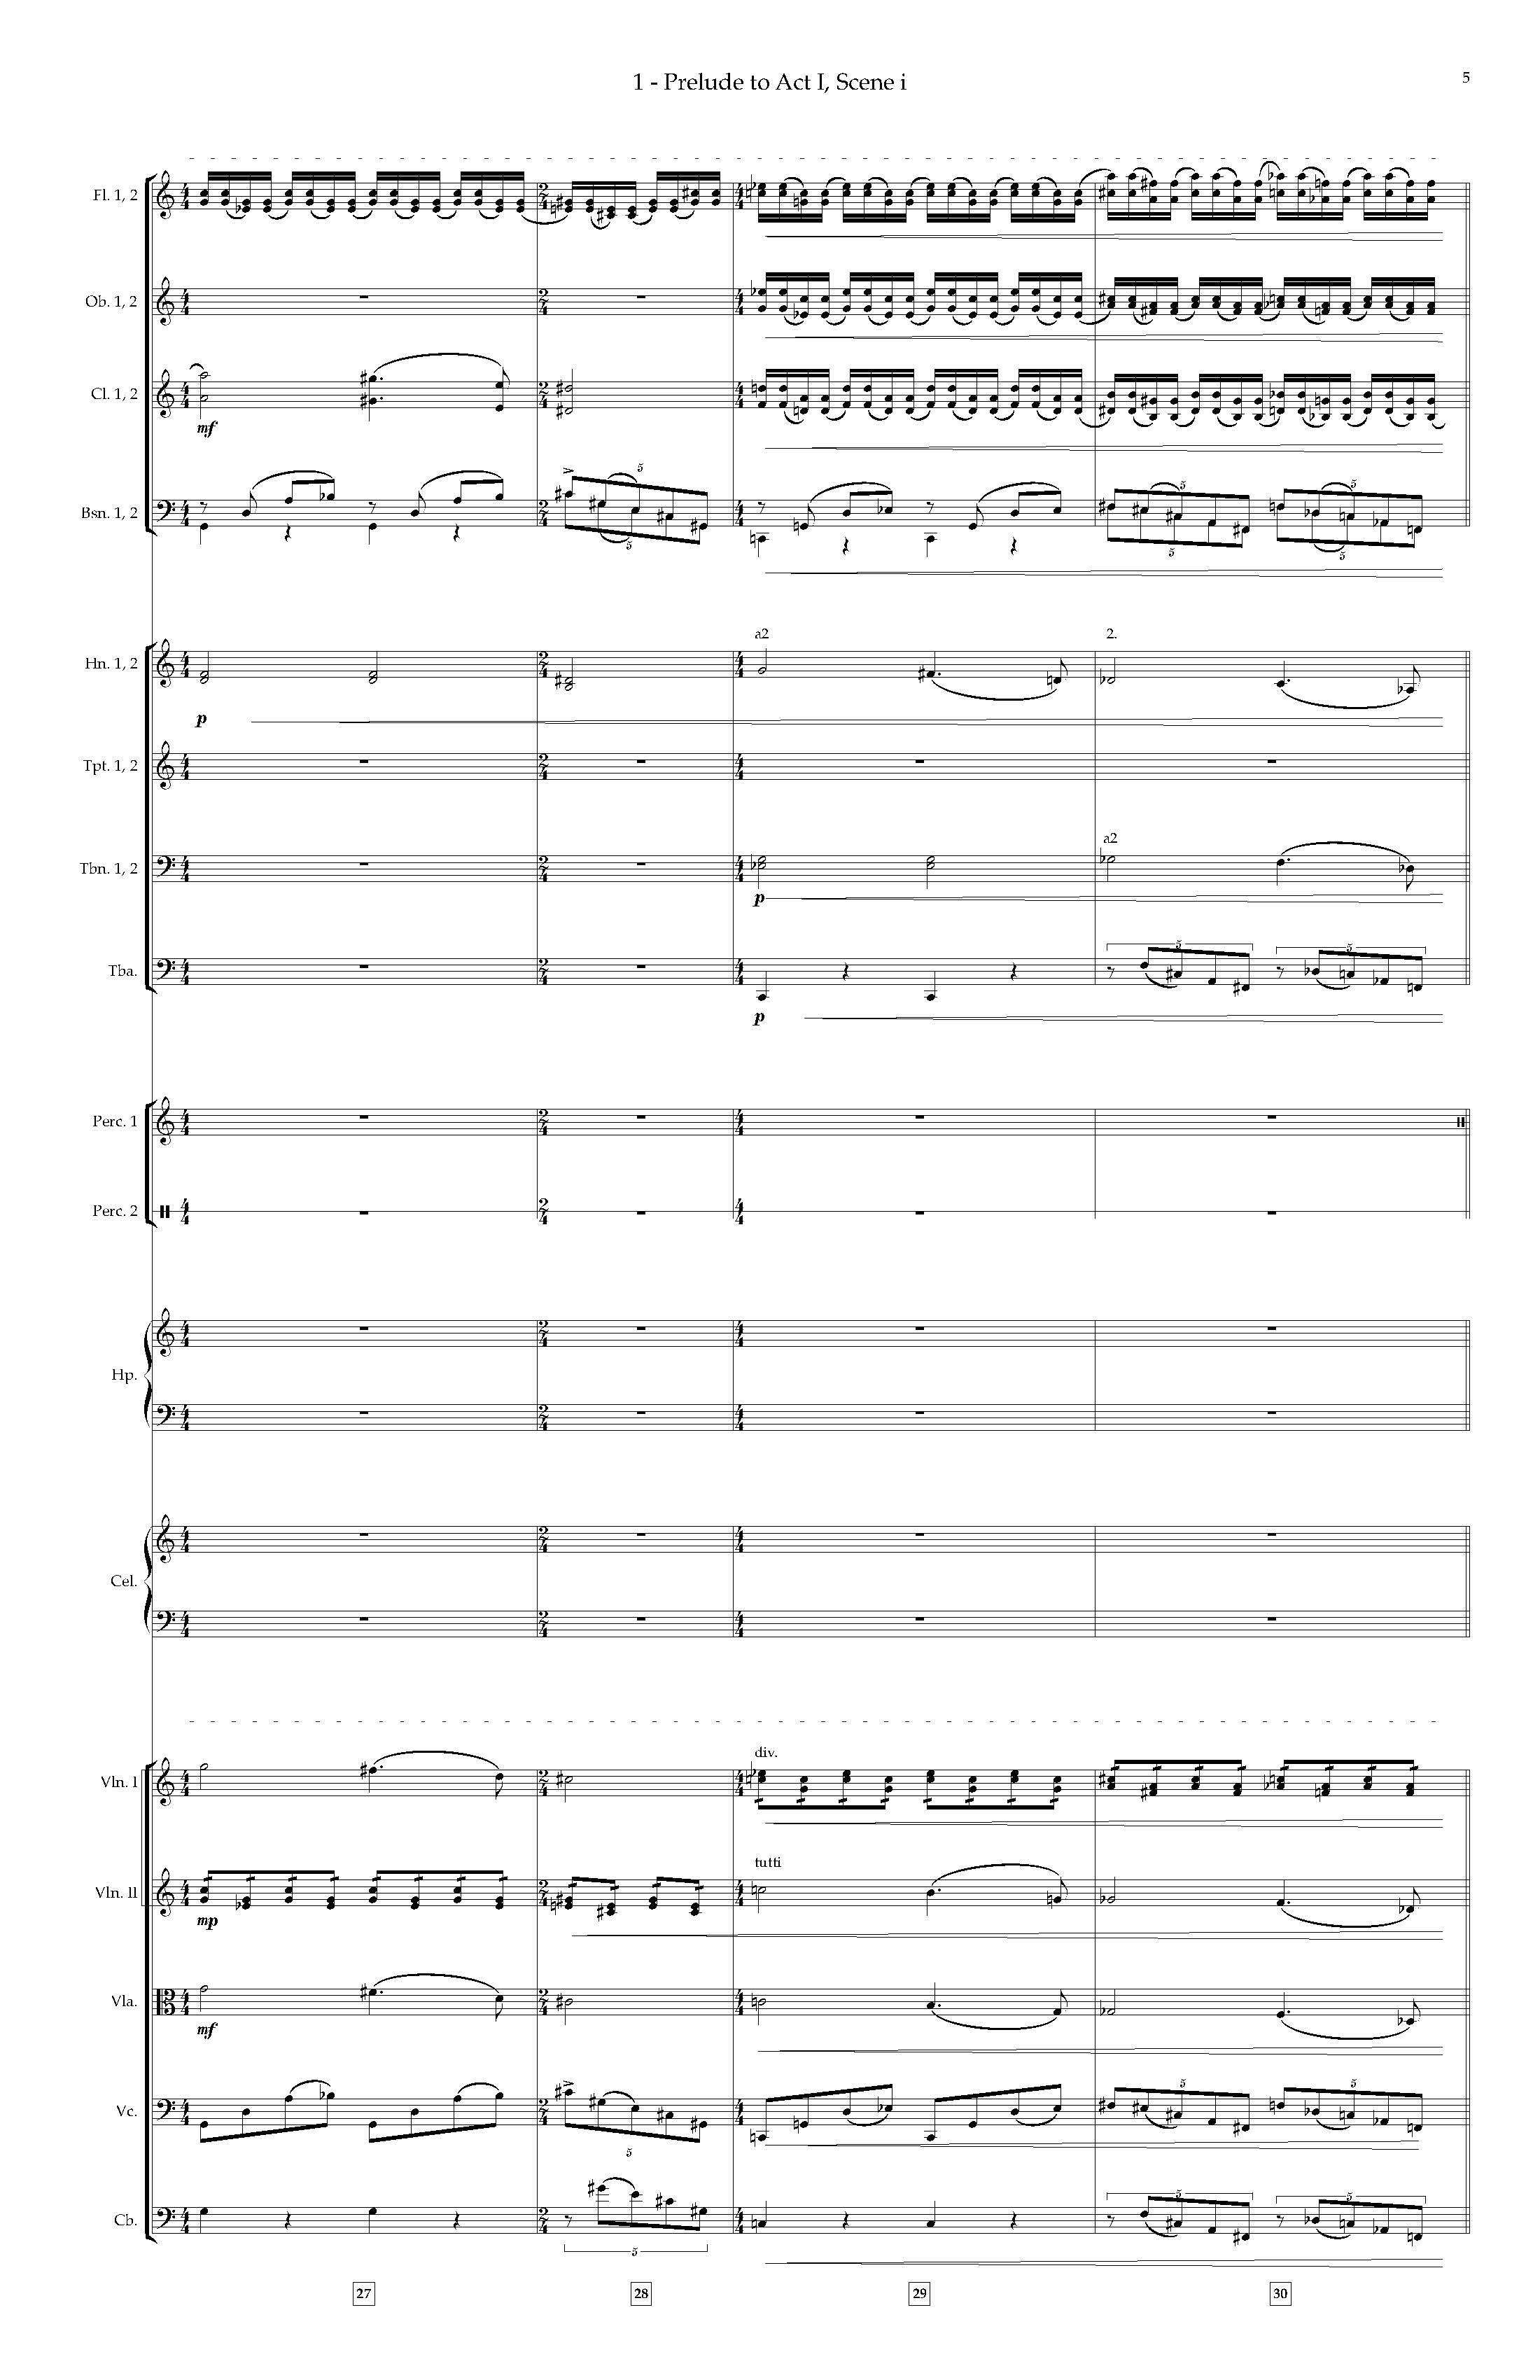 Arias and Interludes from HWGS - Complete Score_Page_11.jpg